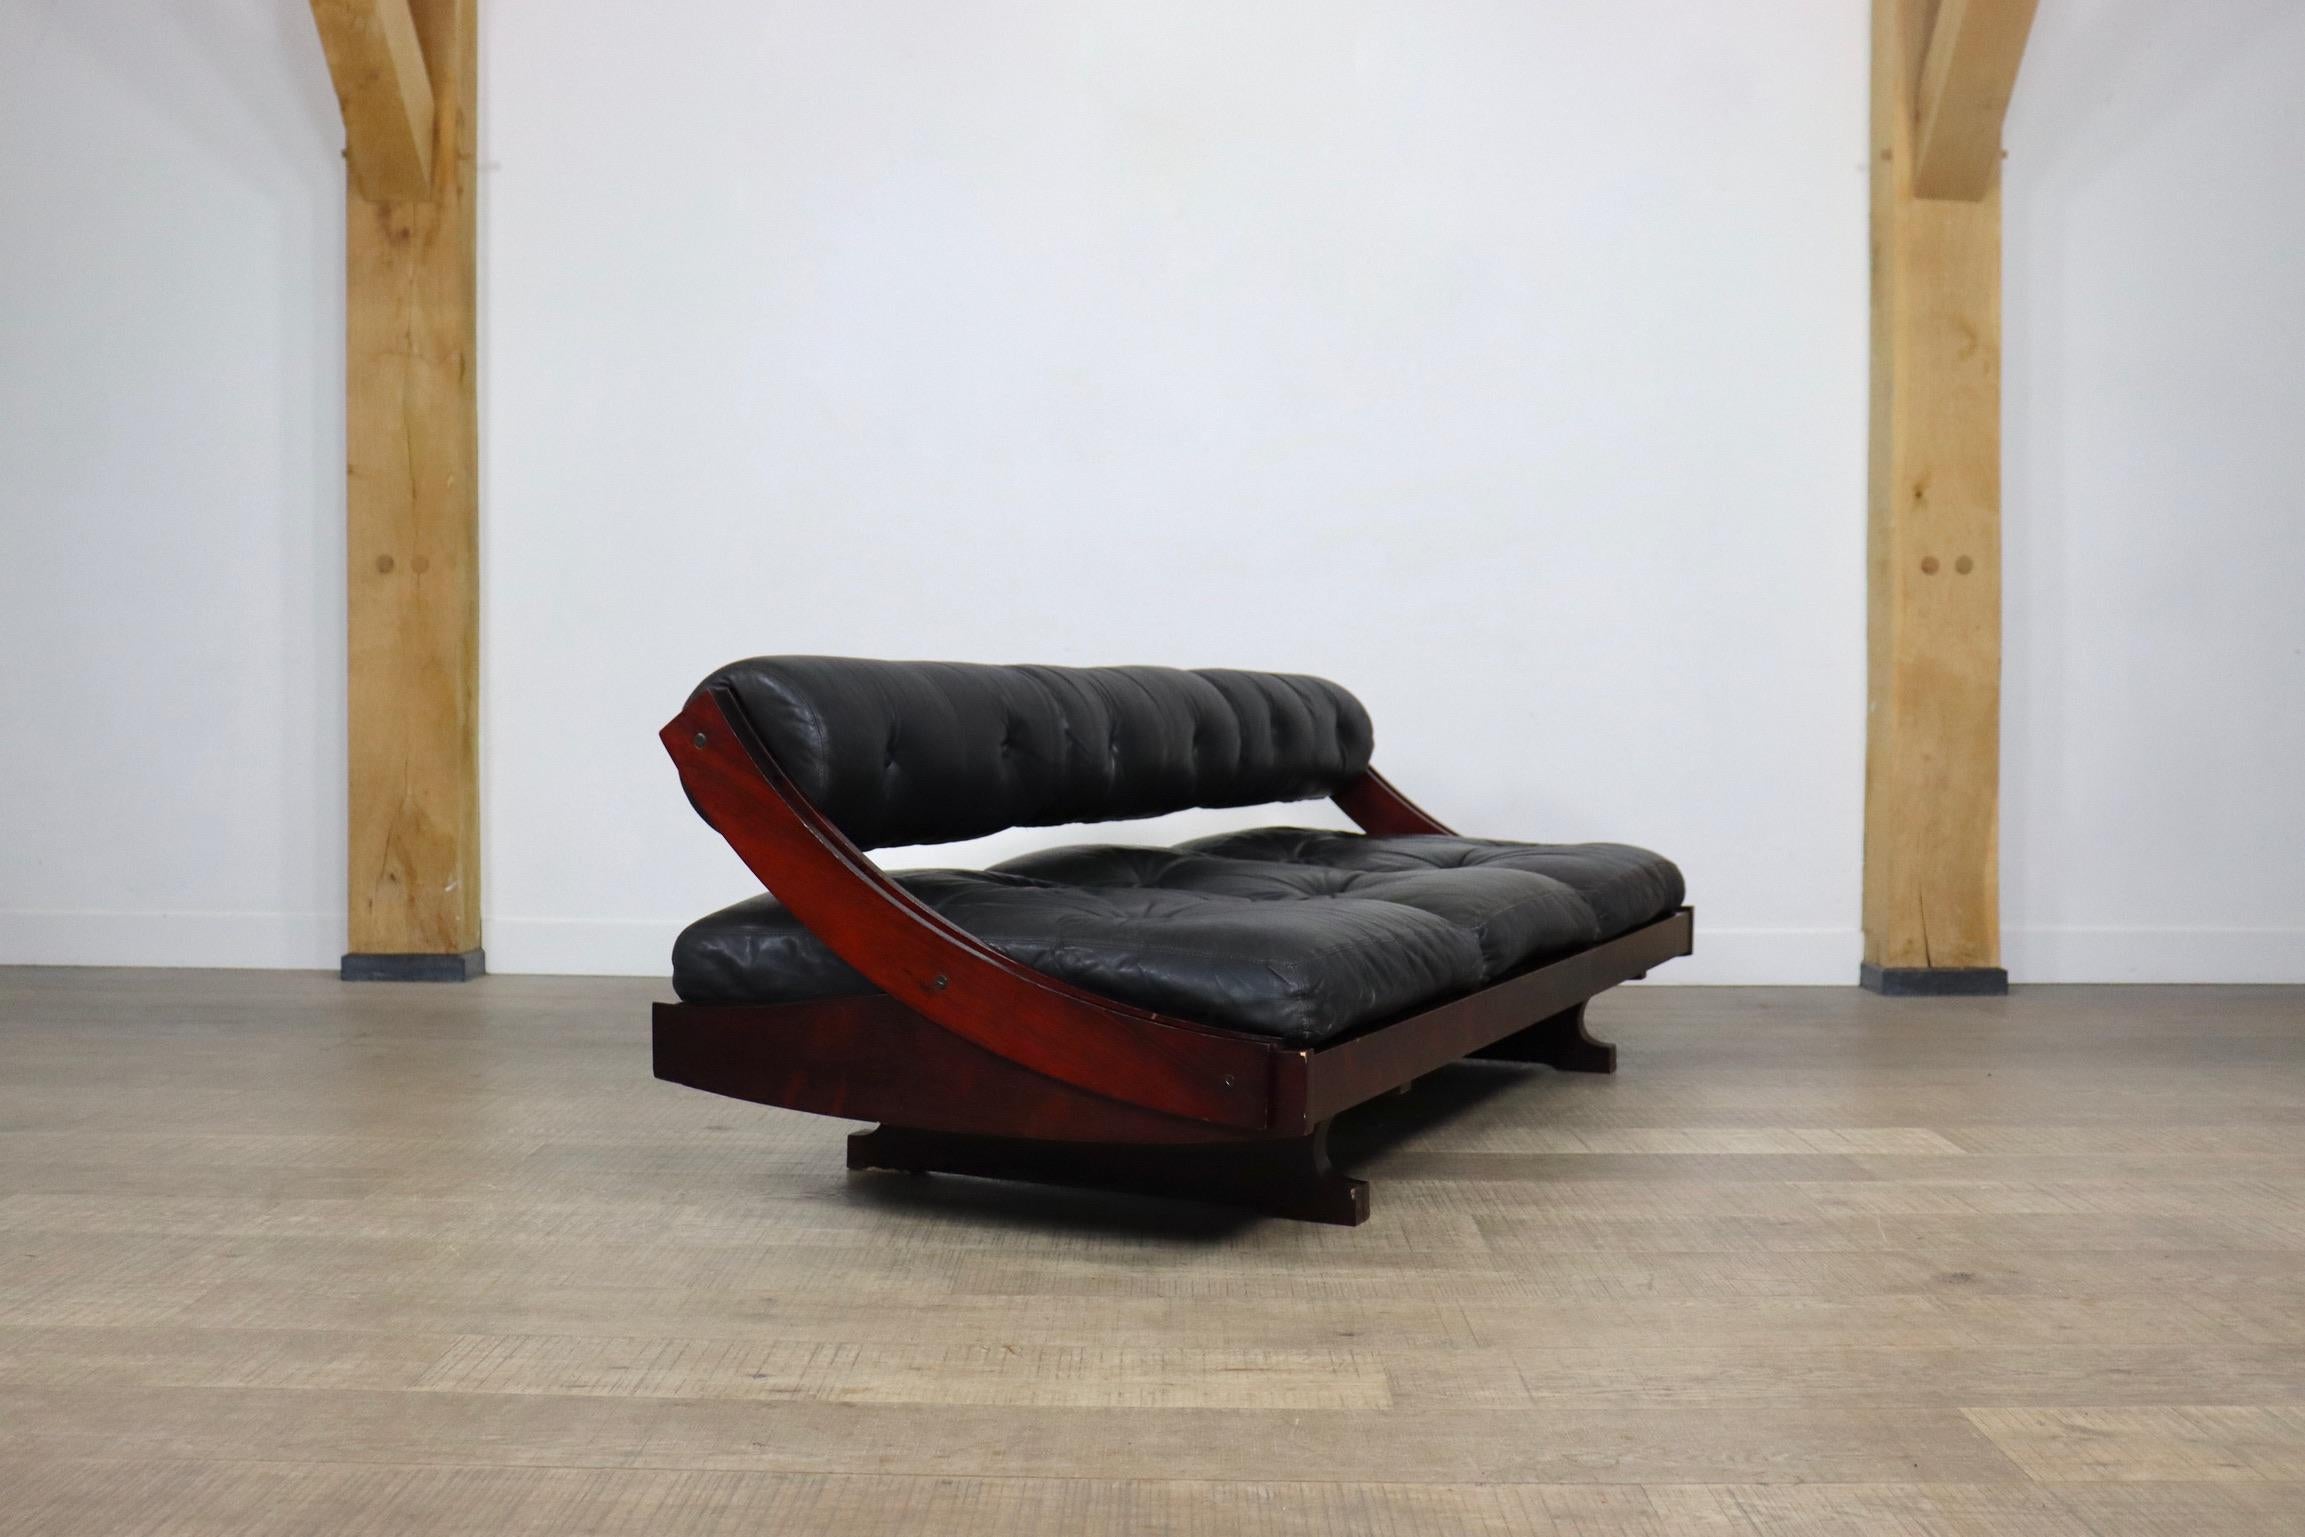 Leather GS195 daybed by Gianni Songia for Sormani, 1963